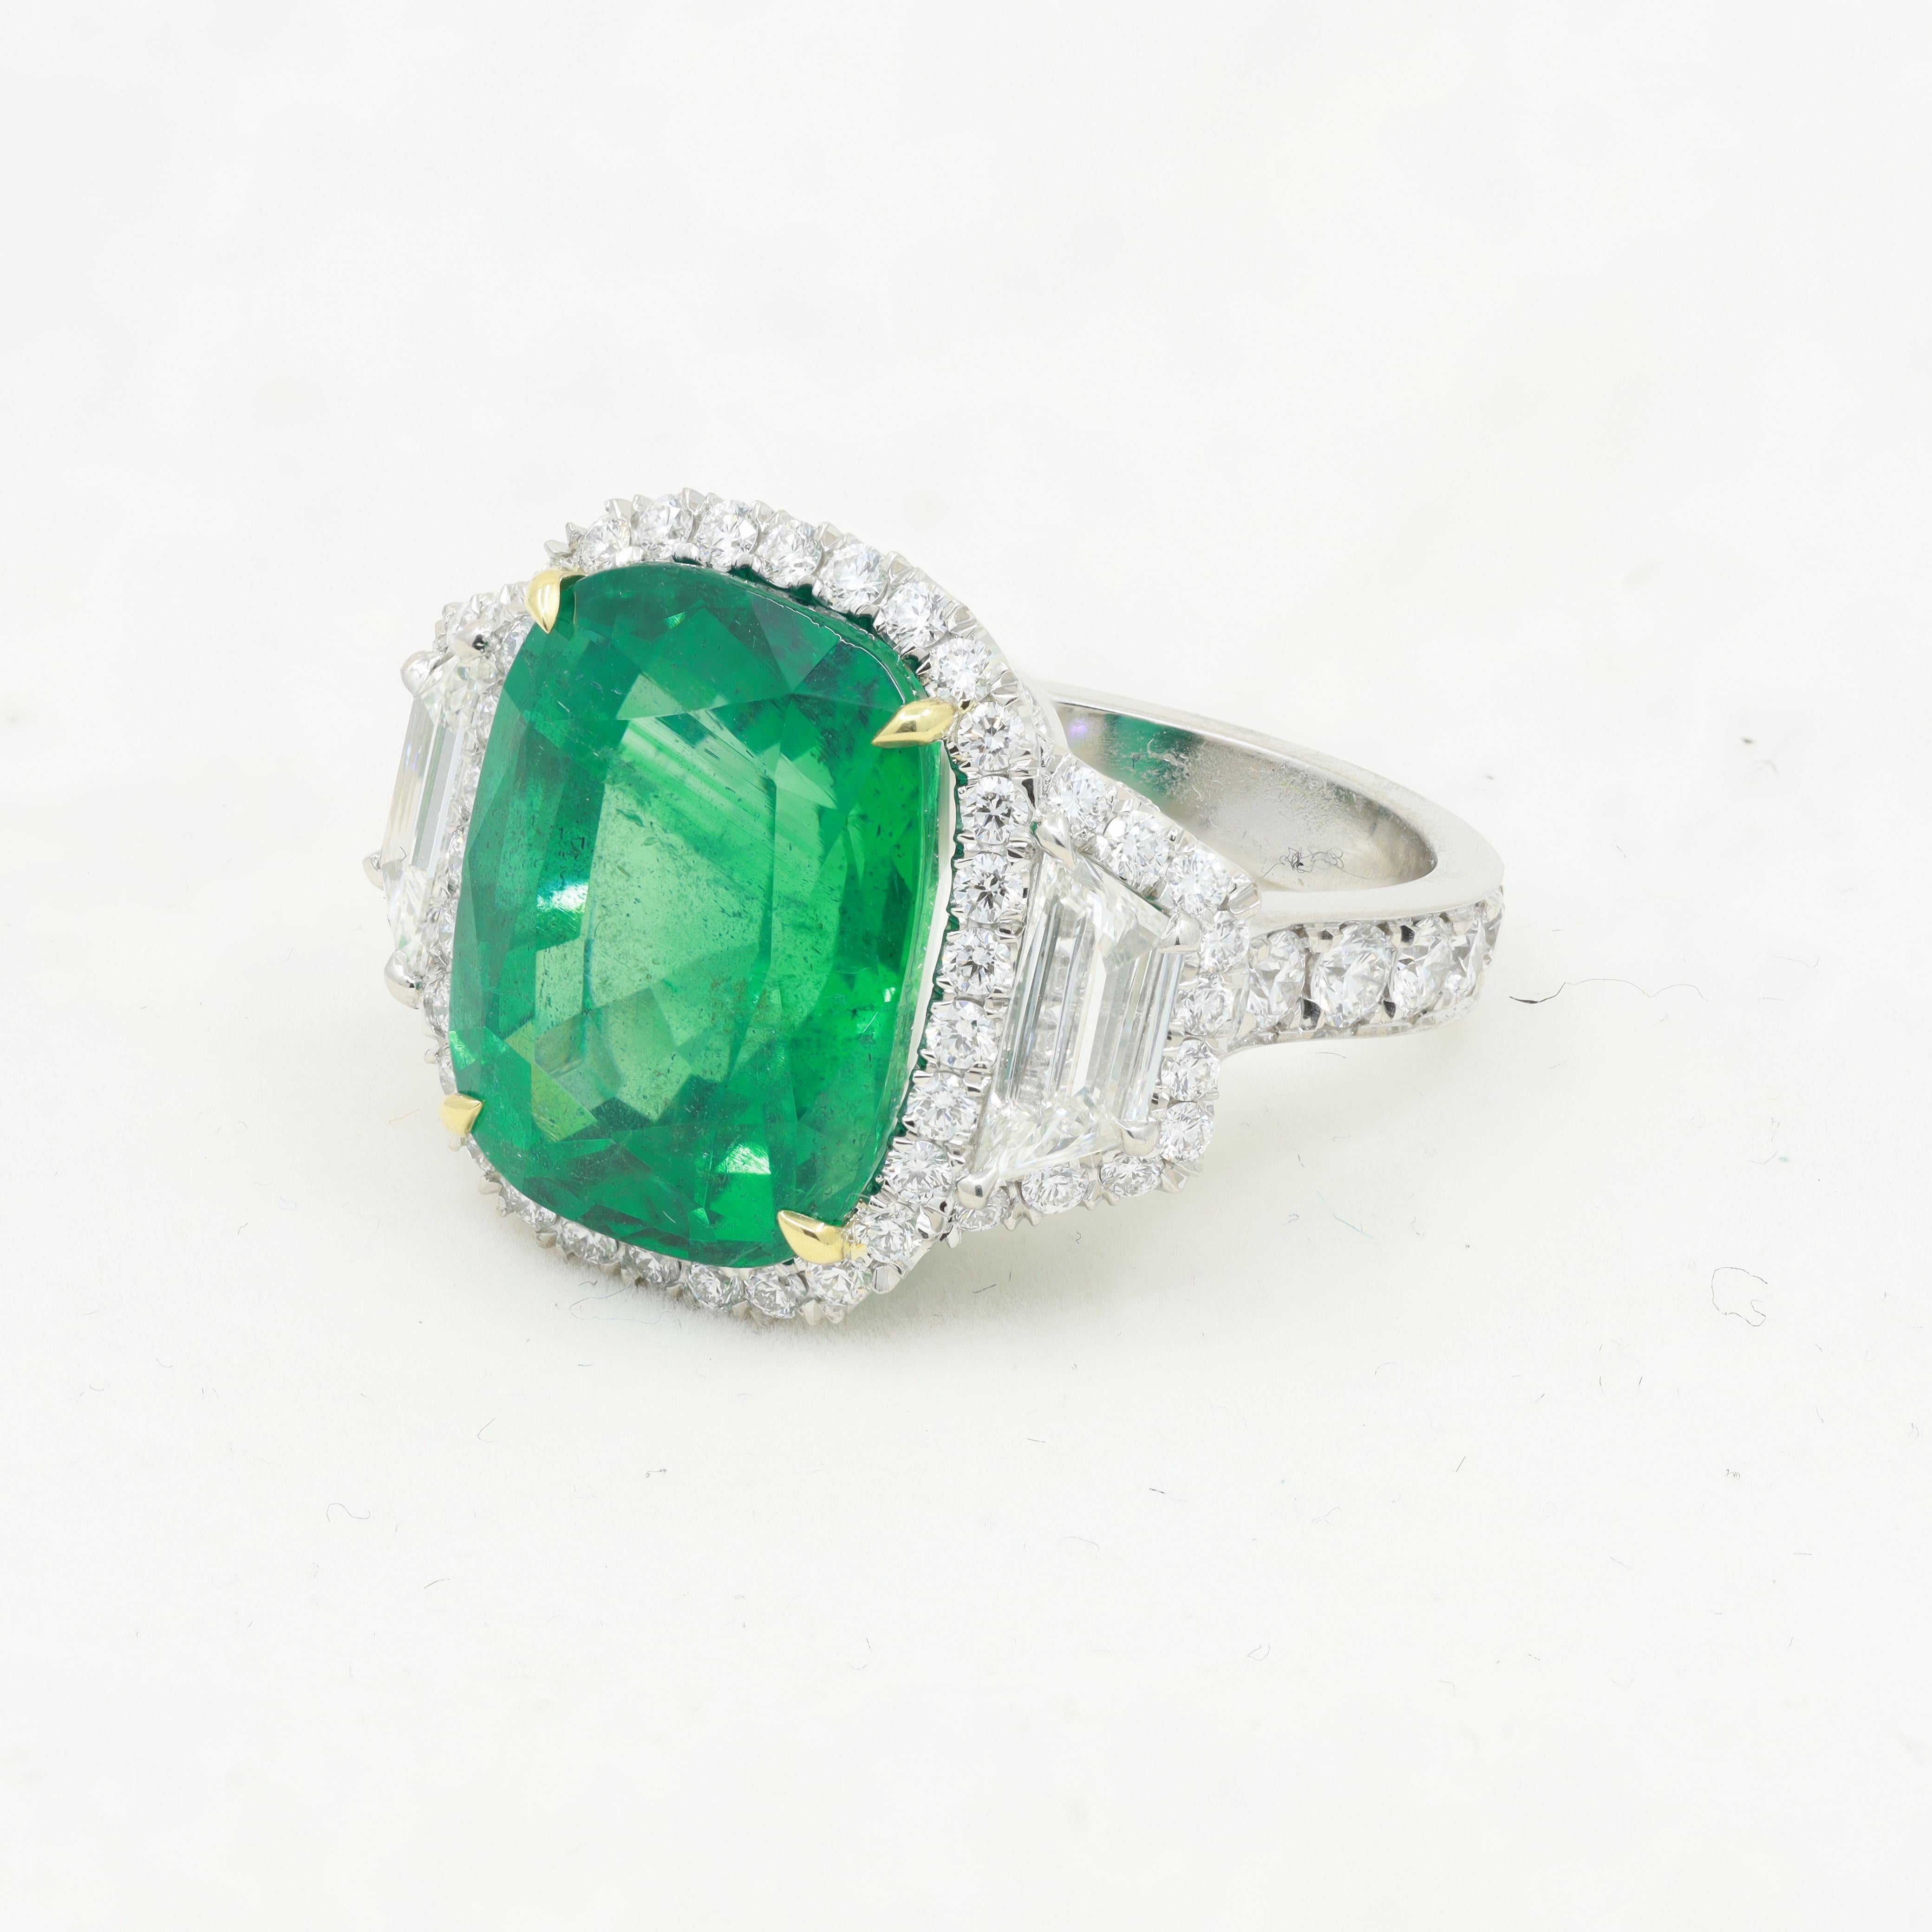 Emerald Cut Diana M. Platinum and 18 kt yellow gold emerald and diamond ring featuring 11.22 For Sale